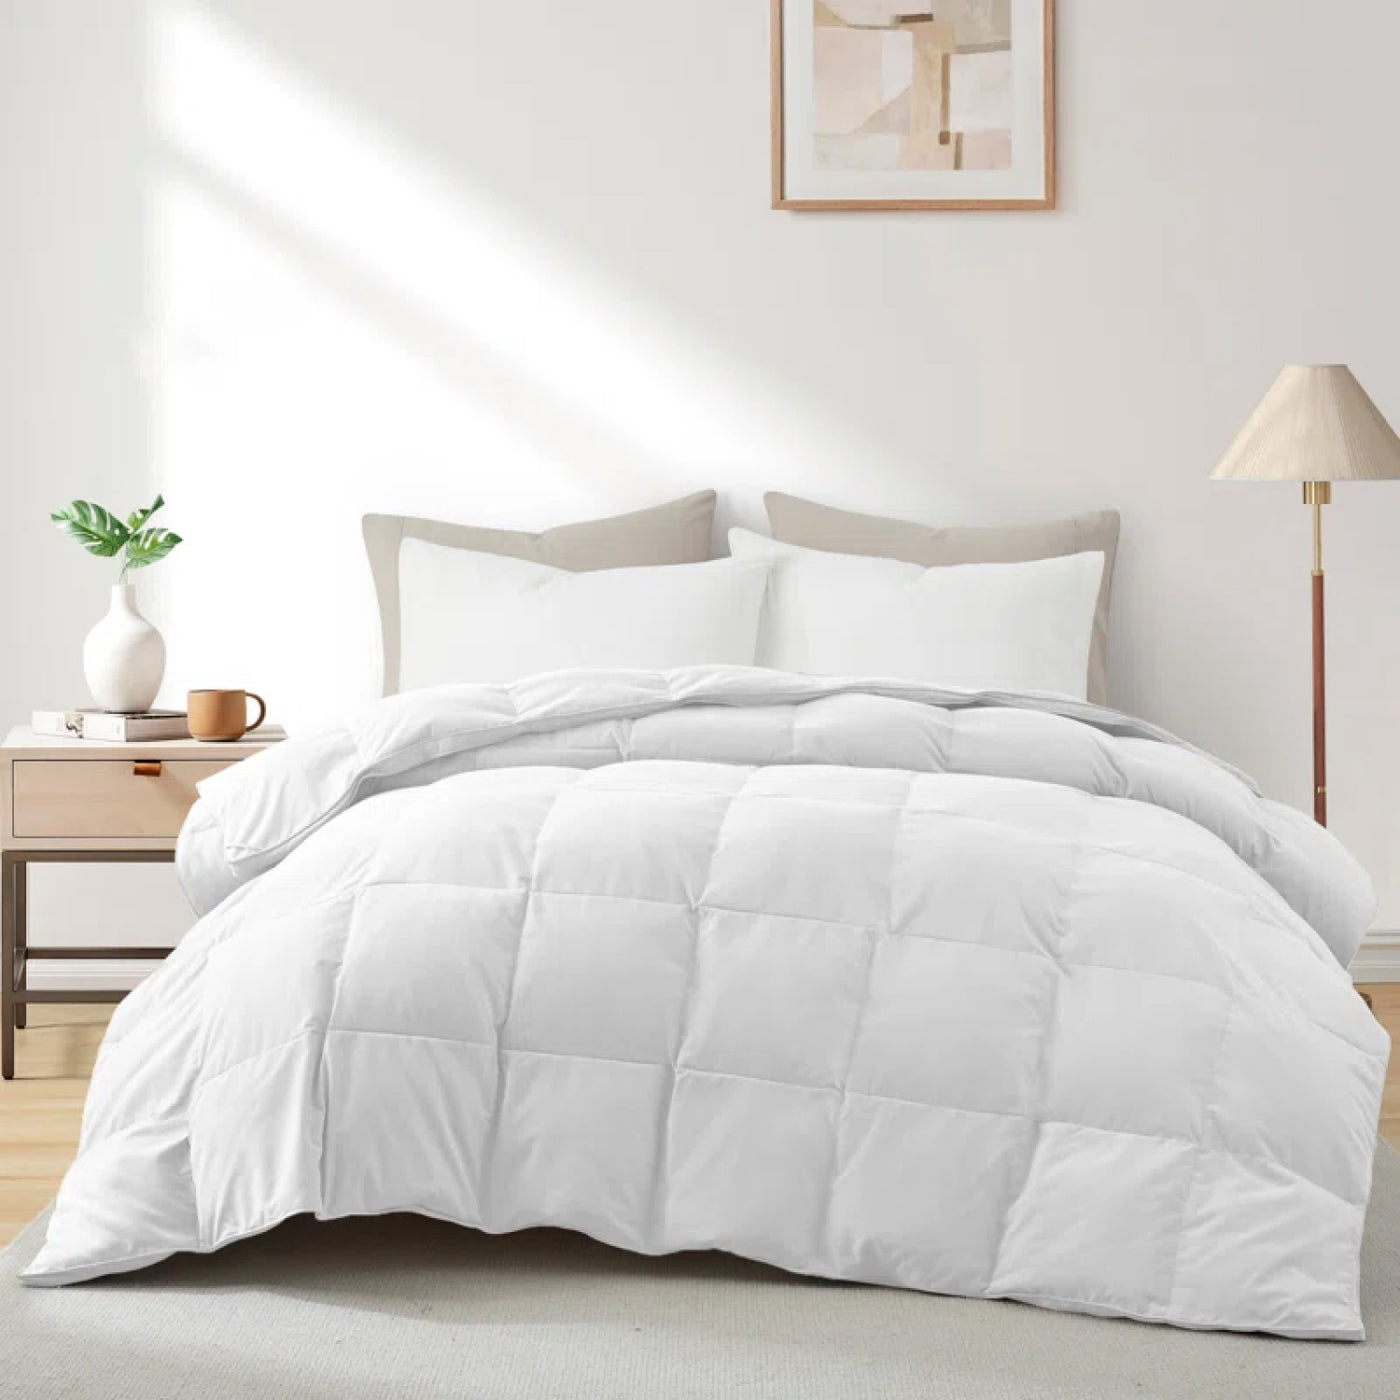 Down Alternative Quilt With Microfiber Fill & 300 TC Egyptian Cotton Exterior - White